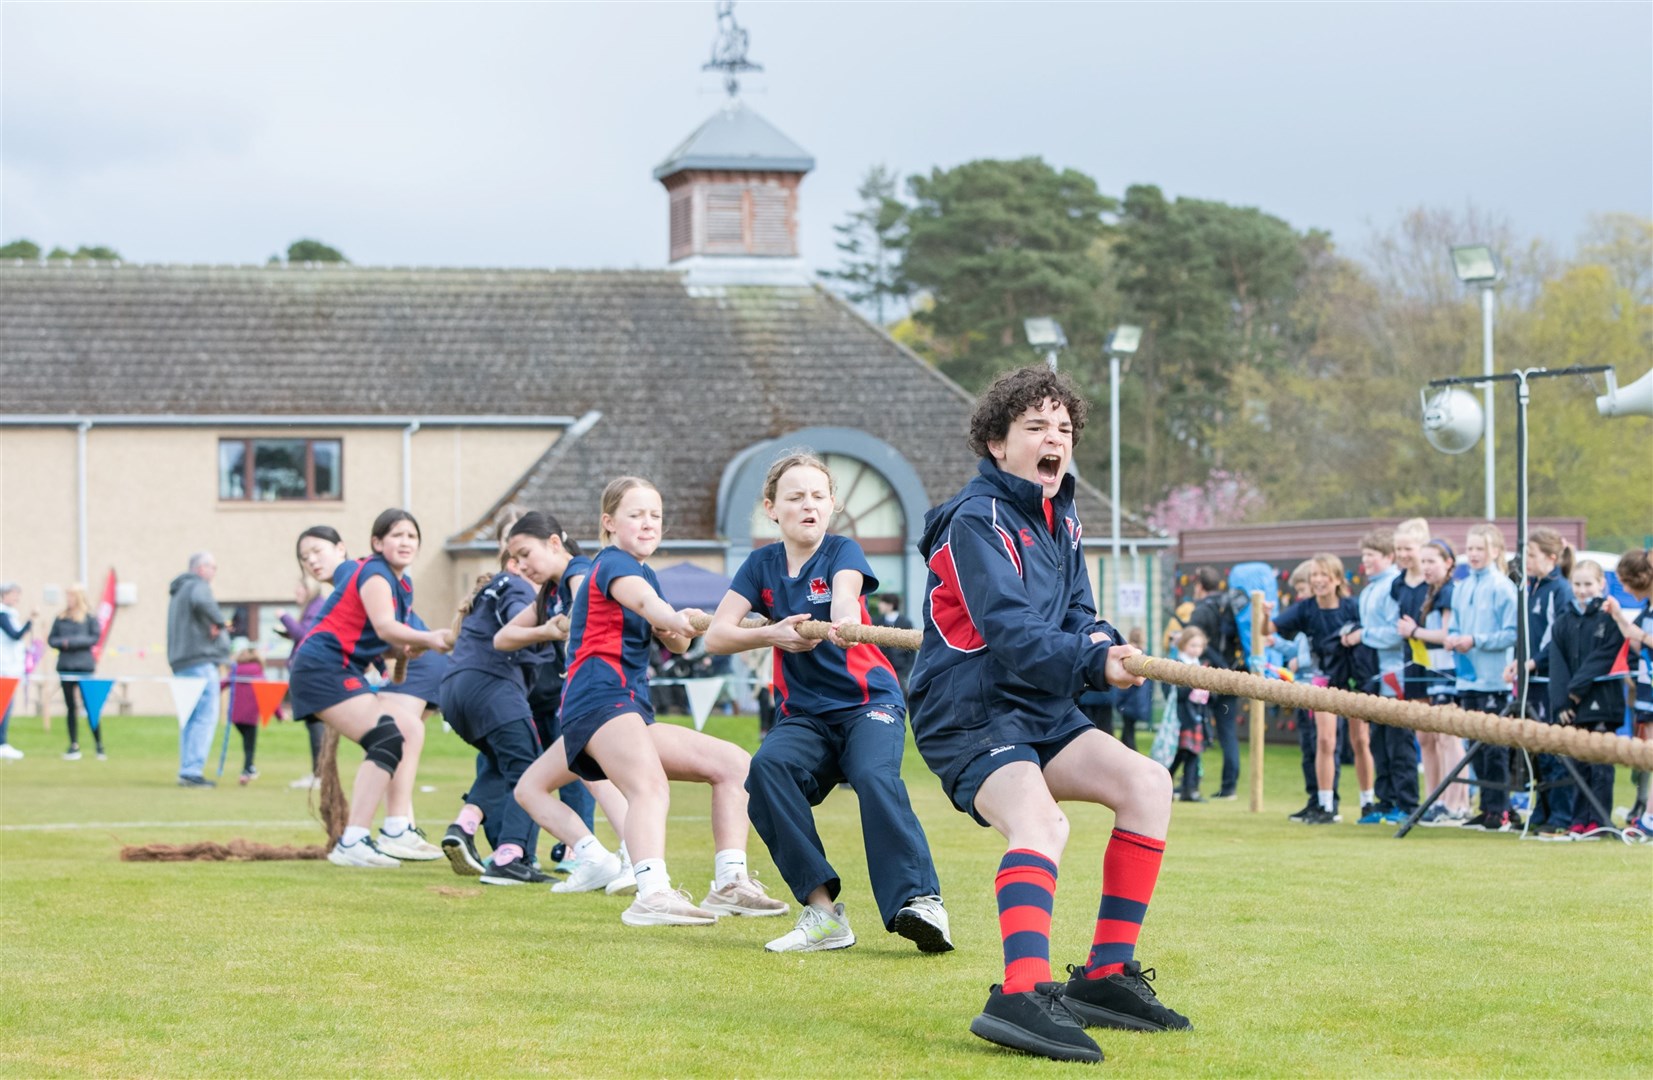 Cargilfield Primary School - an independent school in Edinburgh - were the winners of the Tug O' War. Picture: Daniel Forsyth.